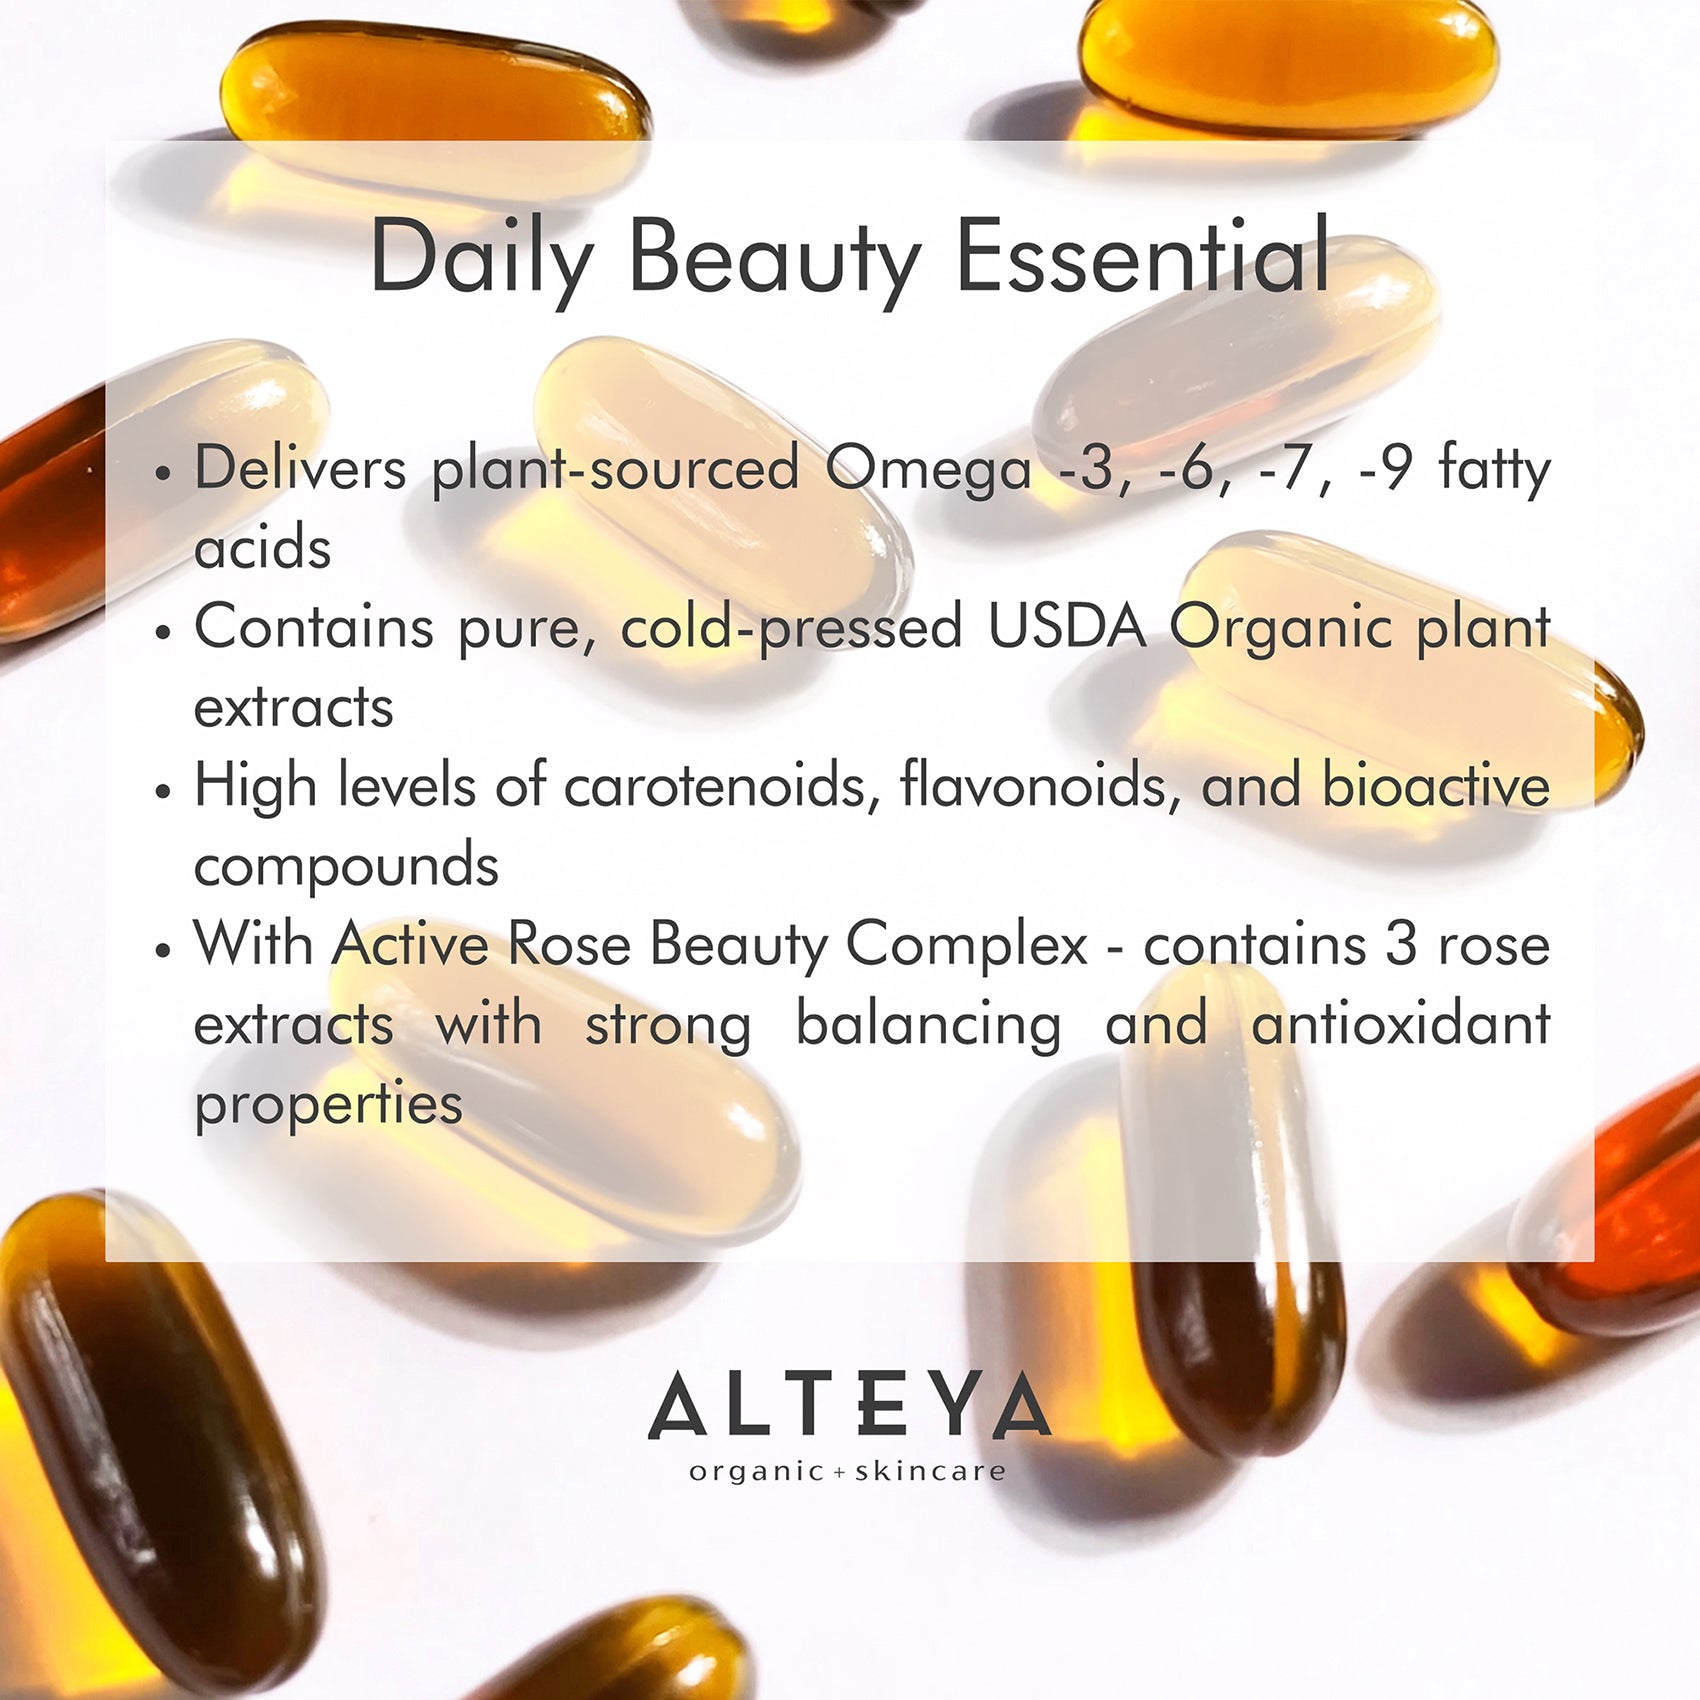 Alteya Organics' Rose Beauty Omegas Skin & Hair Organic Supplement is your daily organic beauty essential.